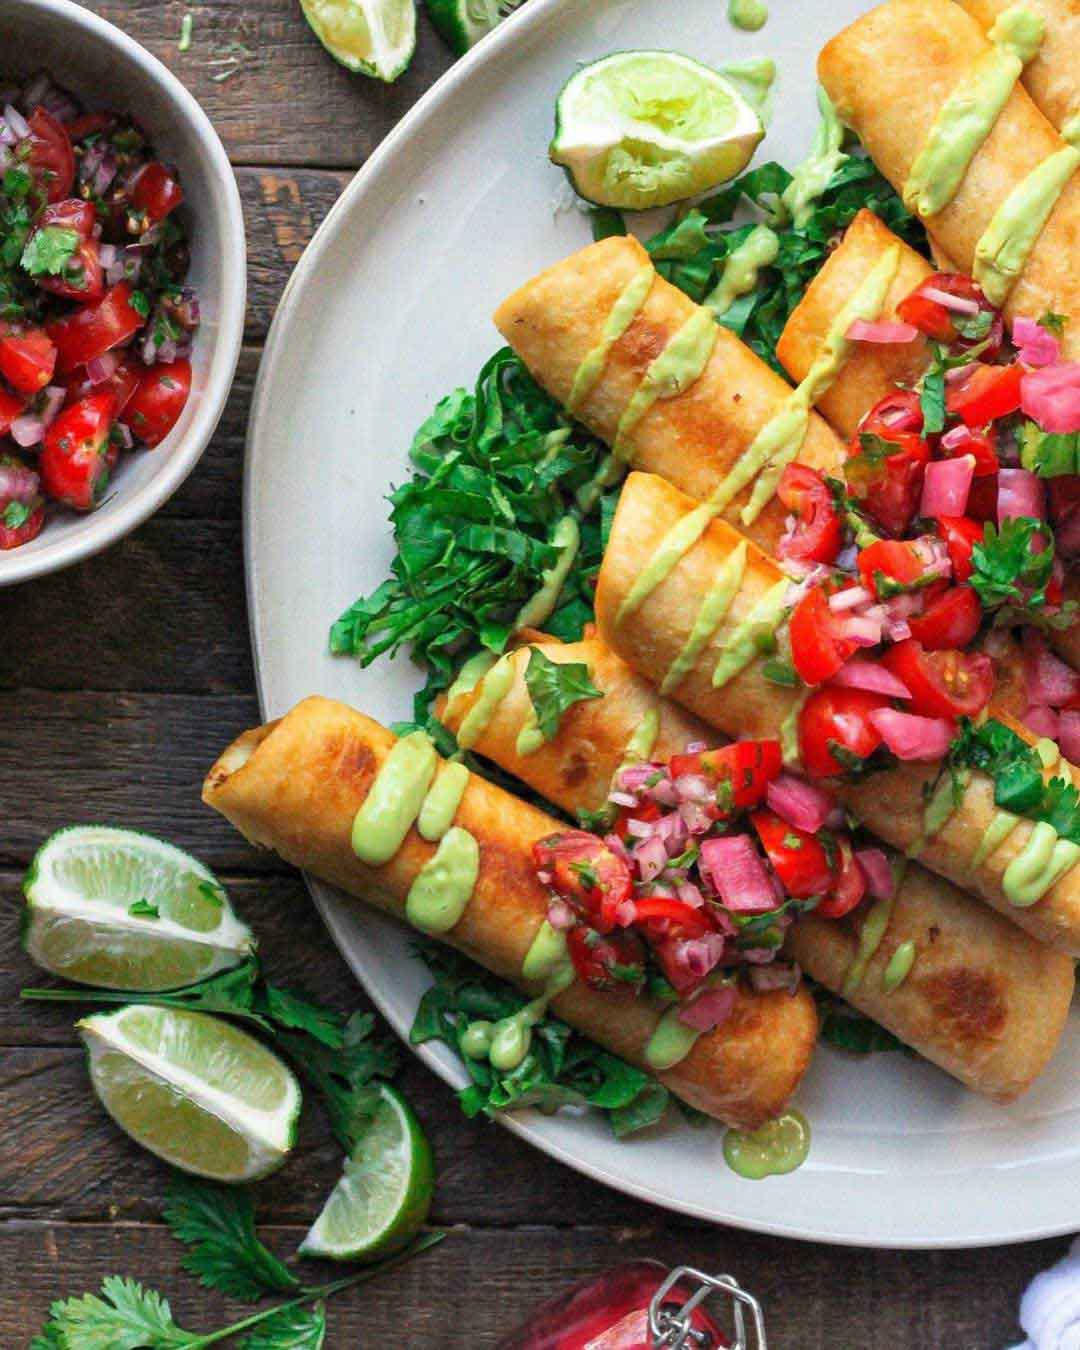 Vegan Chipotle Chick’n Flautas with Avocado Crema recipe served on a plate with fresh limes.